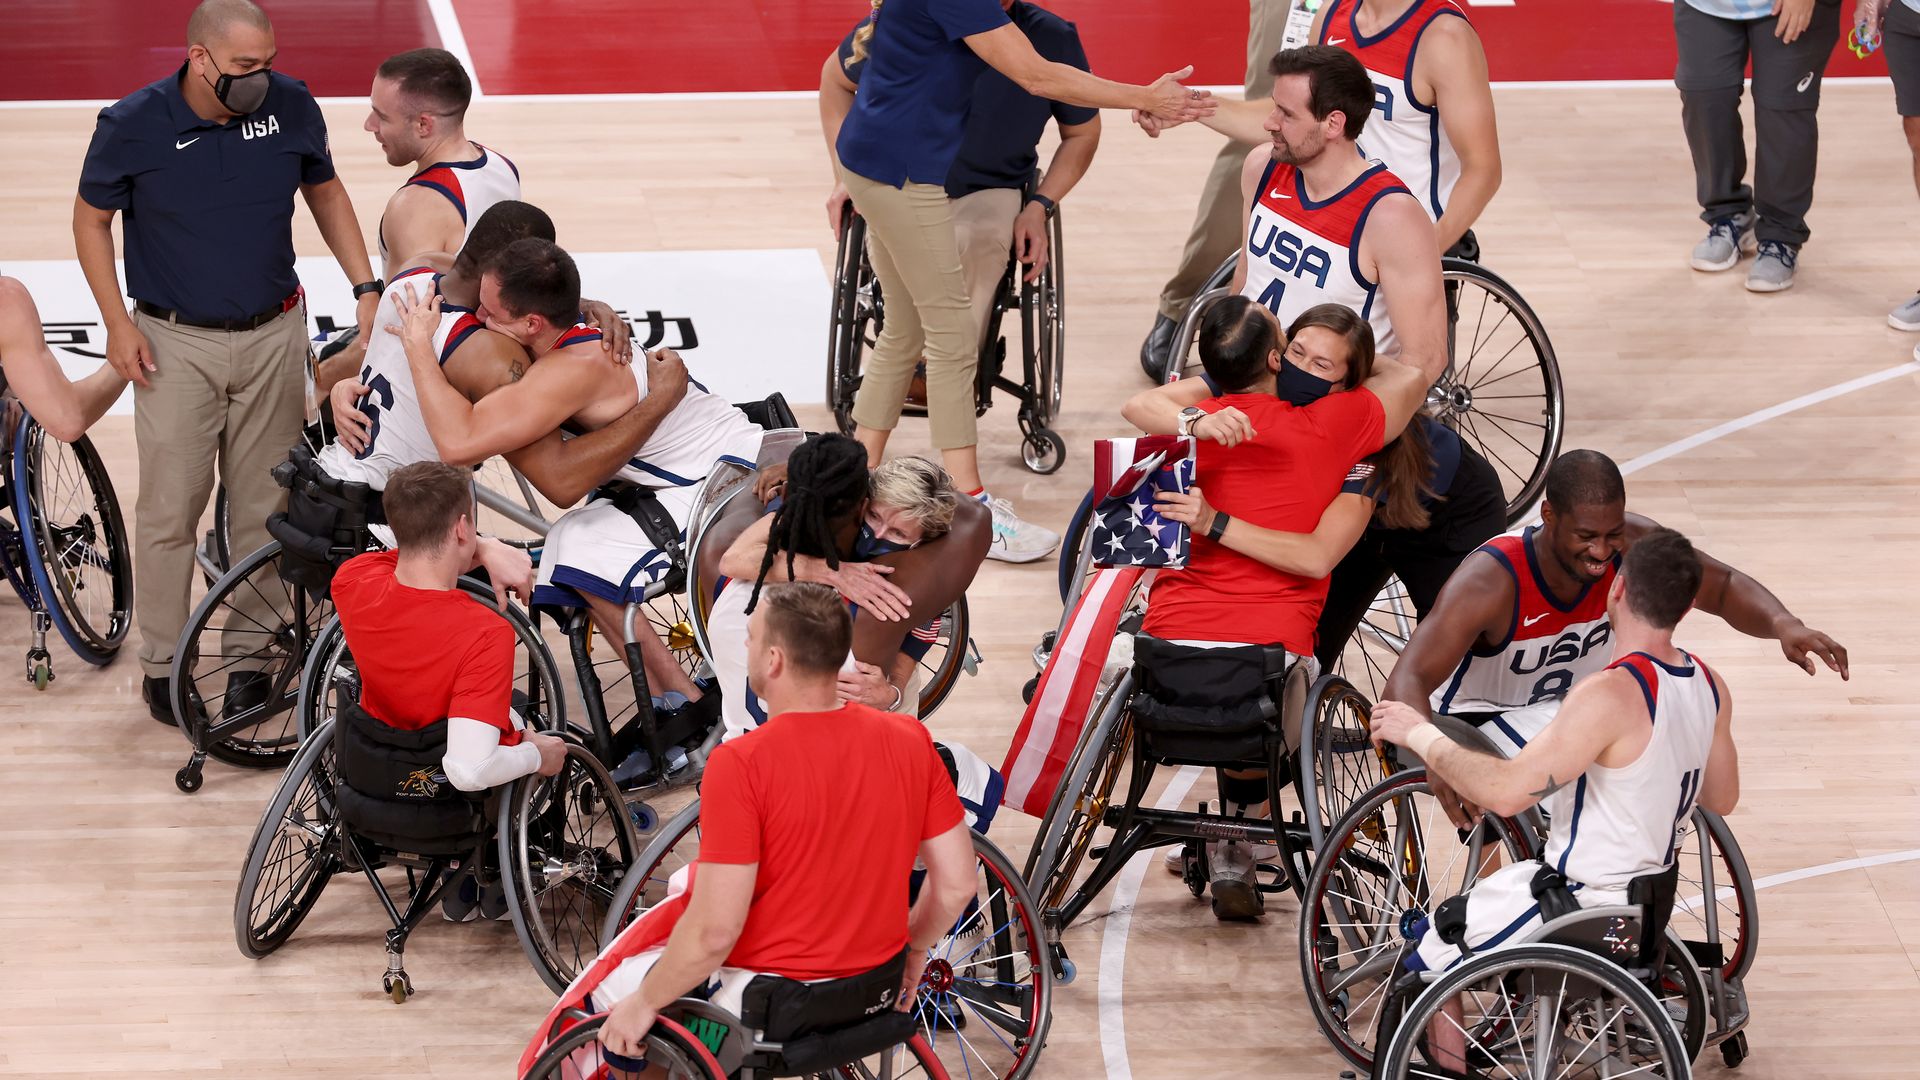  Team USA celebrate after defeating Team Japan during the men's Wheelchair Basketball gold medal game at the Tokyo Paralympic Games in Ariake Arena on Sunday.